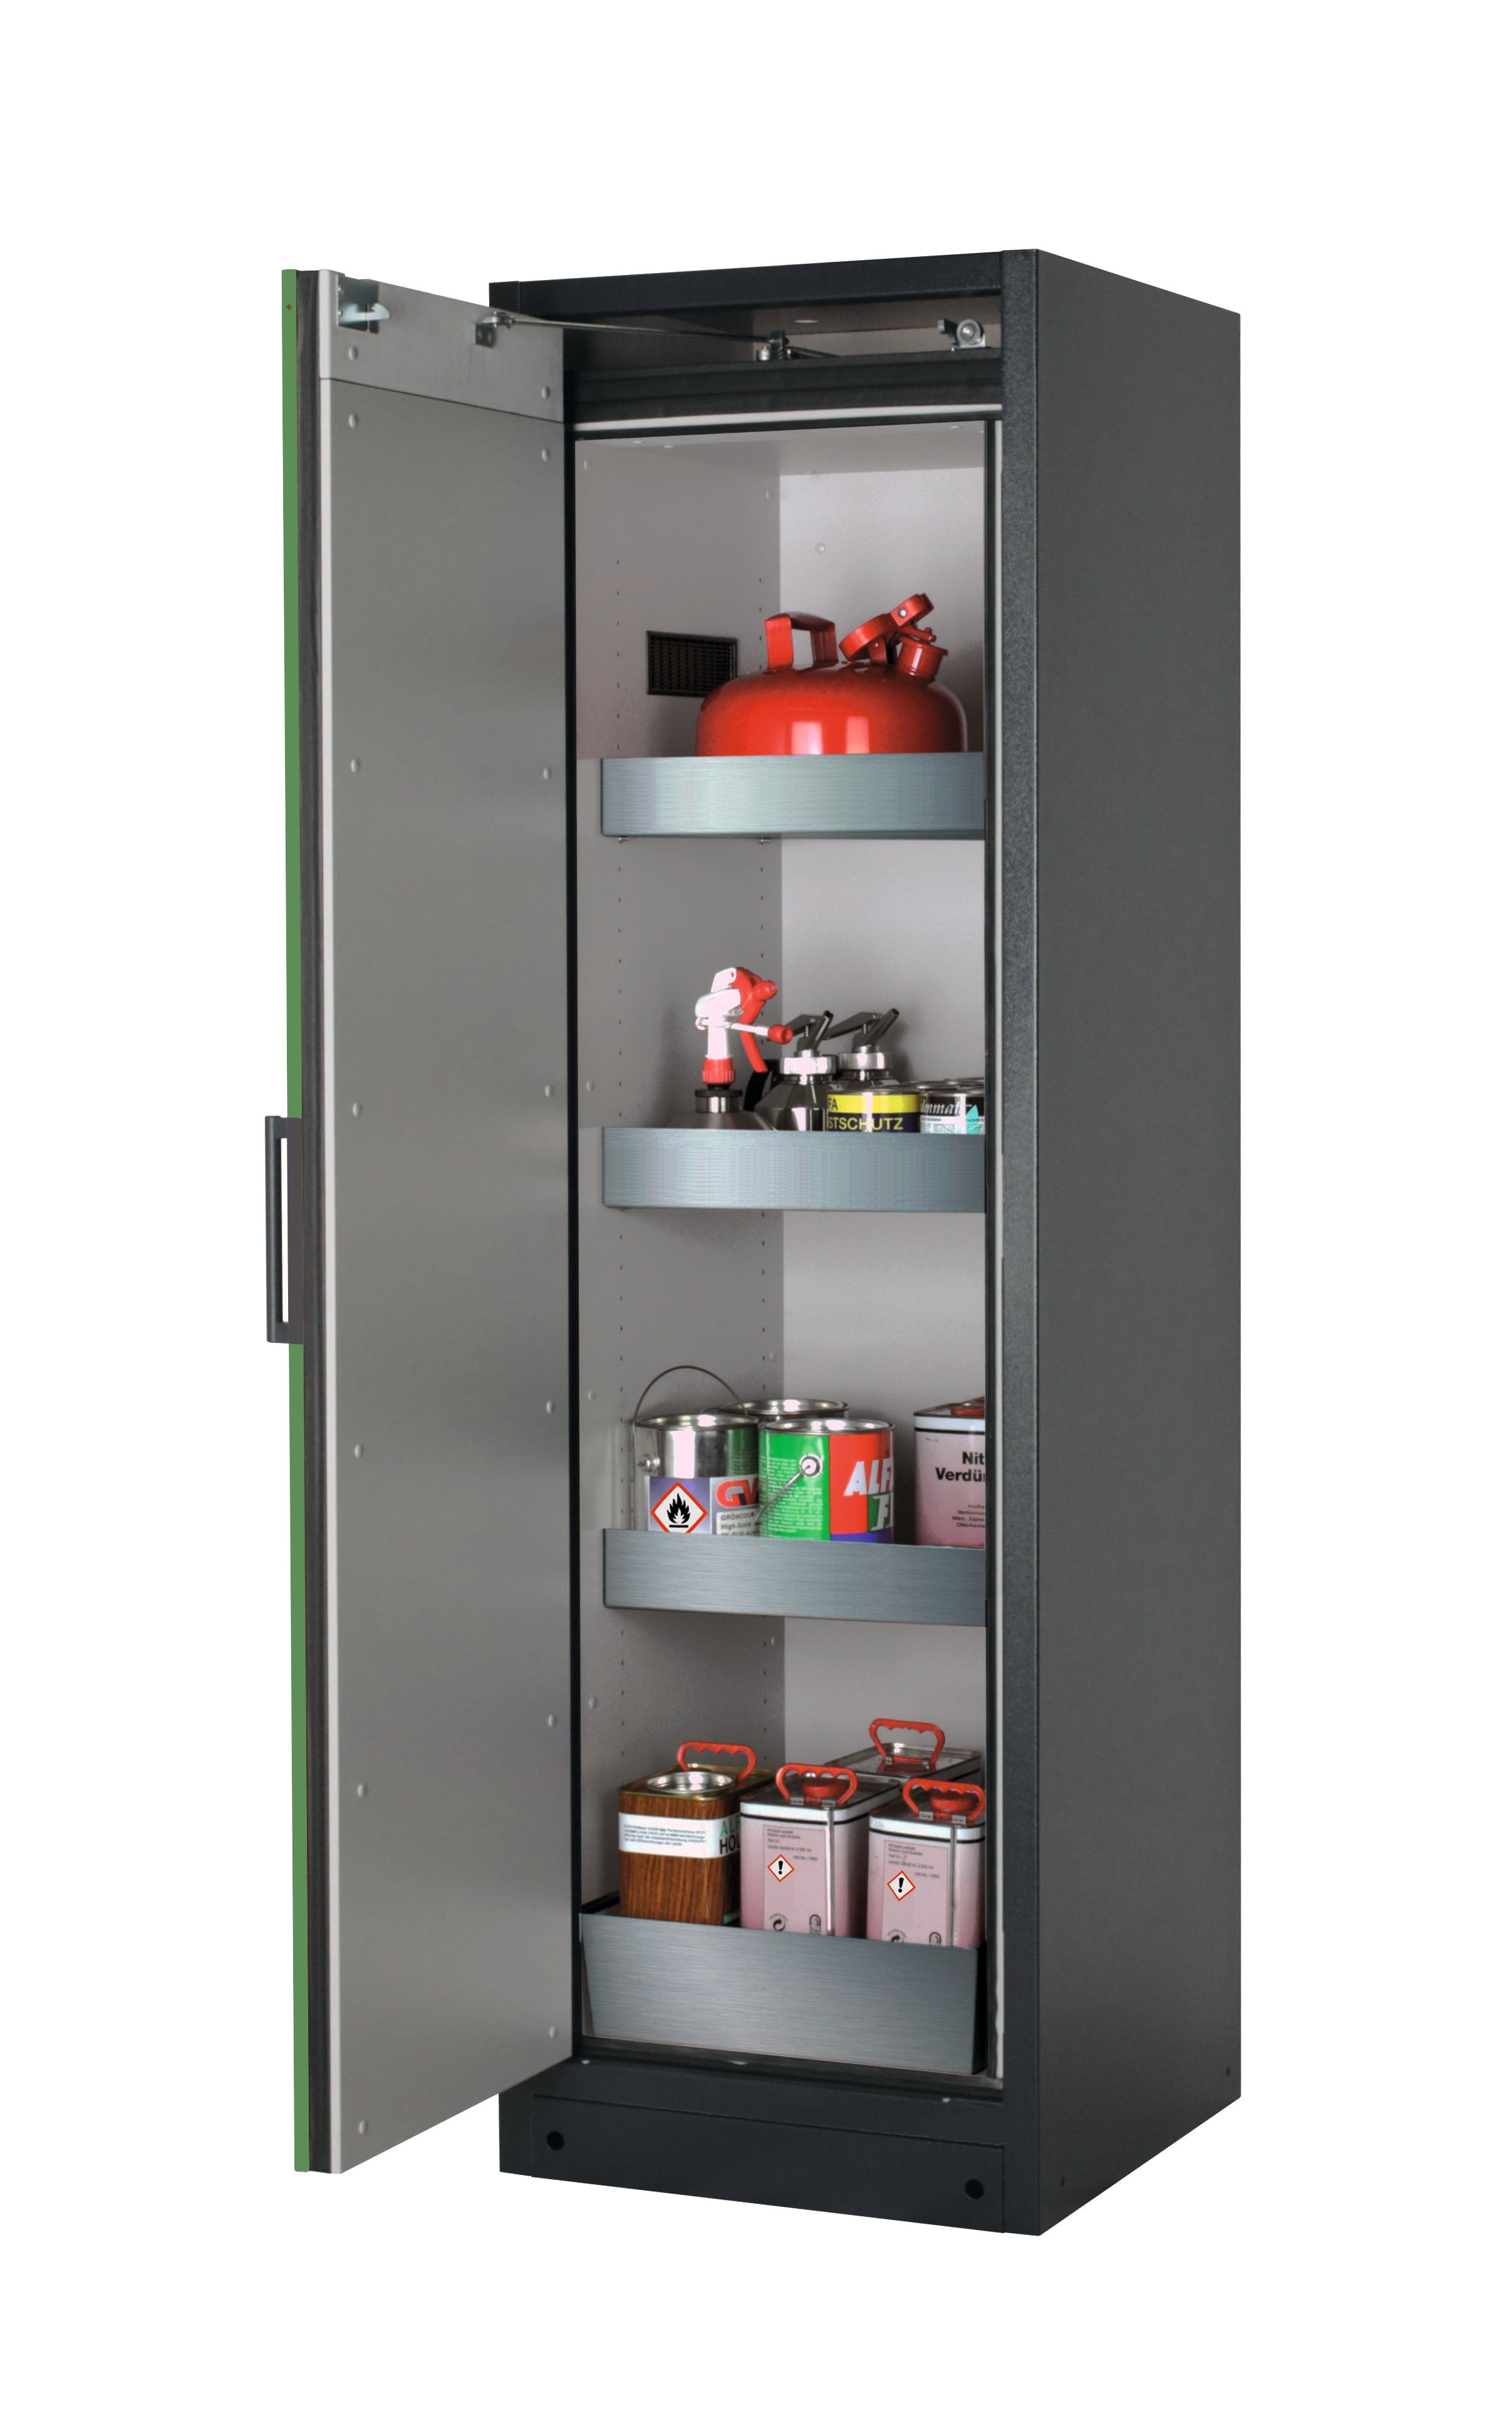 Type 90 safety storage cabinet Q-PEGASUS-90 model Q90.195.060.WDAC in reseda green RAL 6011 with 3x tray shelf (standard) (stainless steel 1.4301),